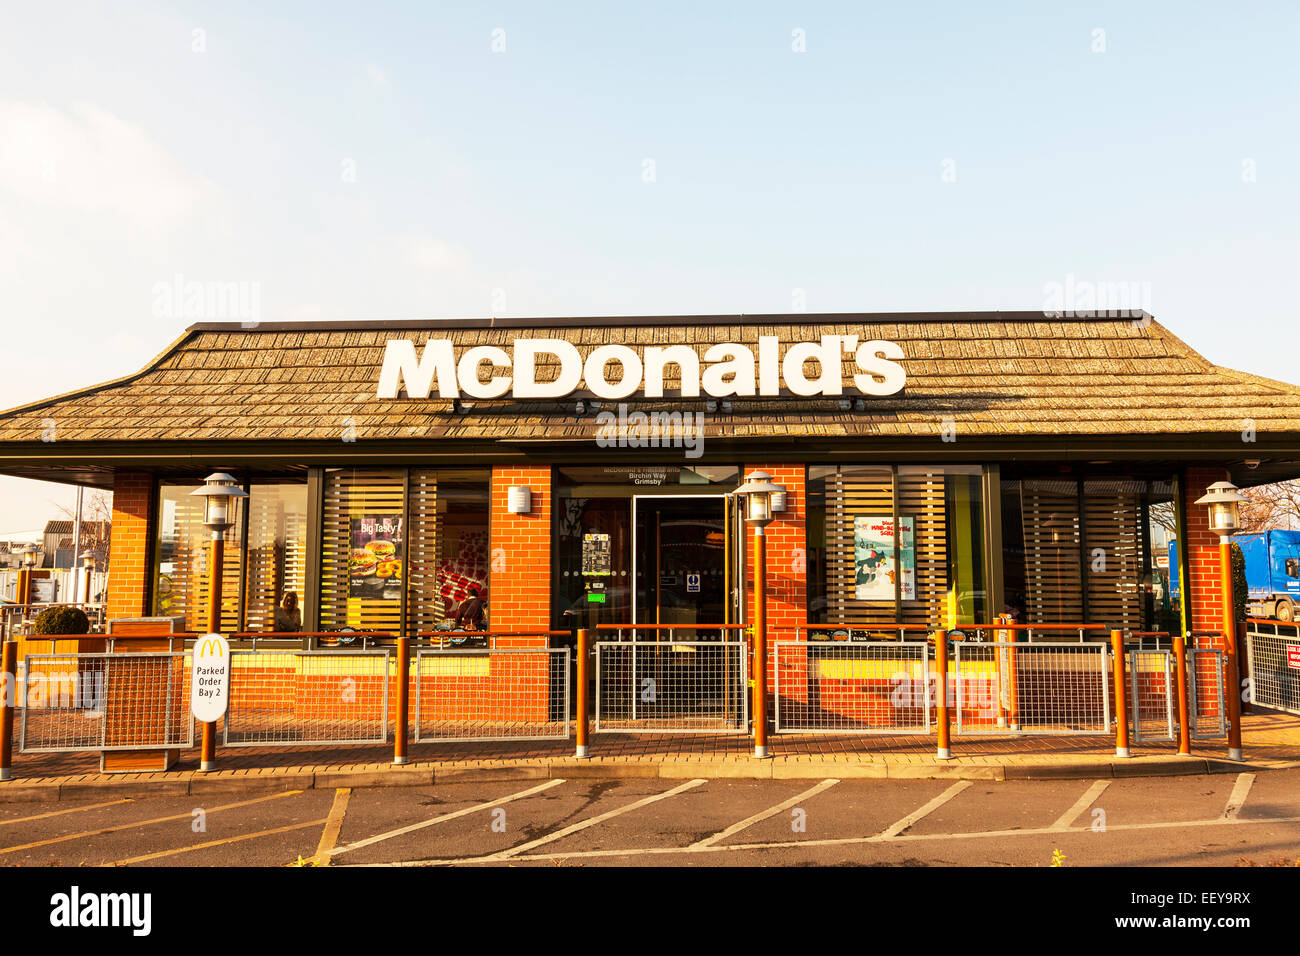 McDonald's restaurant burger chain store shop food outlet building exterior sign Grimsby Town Lincolnshire Humberside UK England Stock Photo